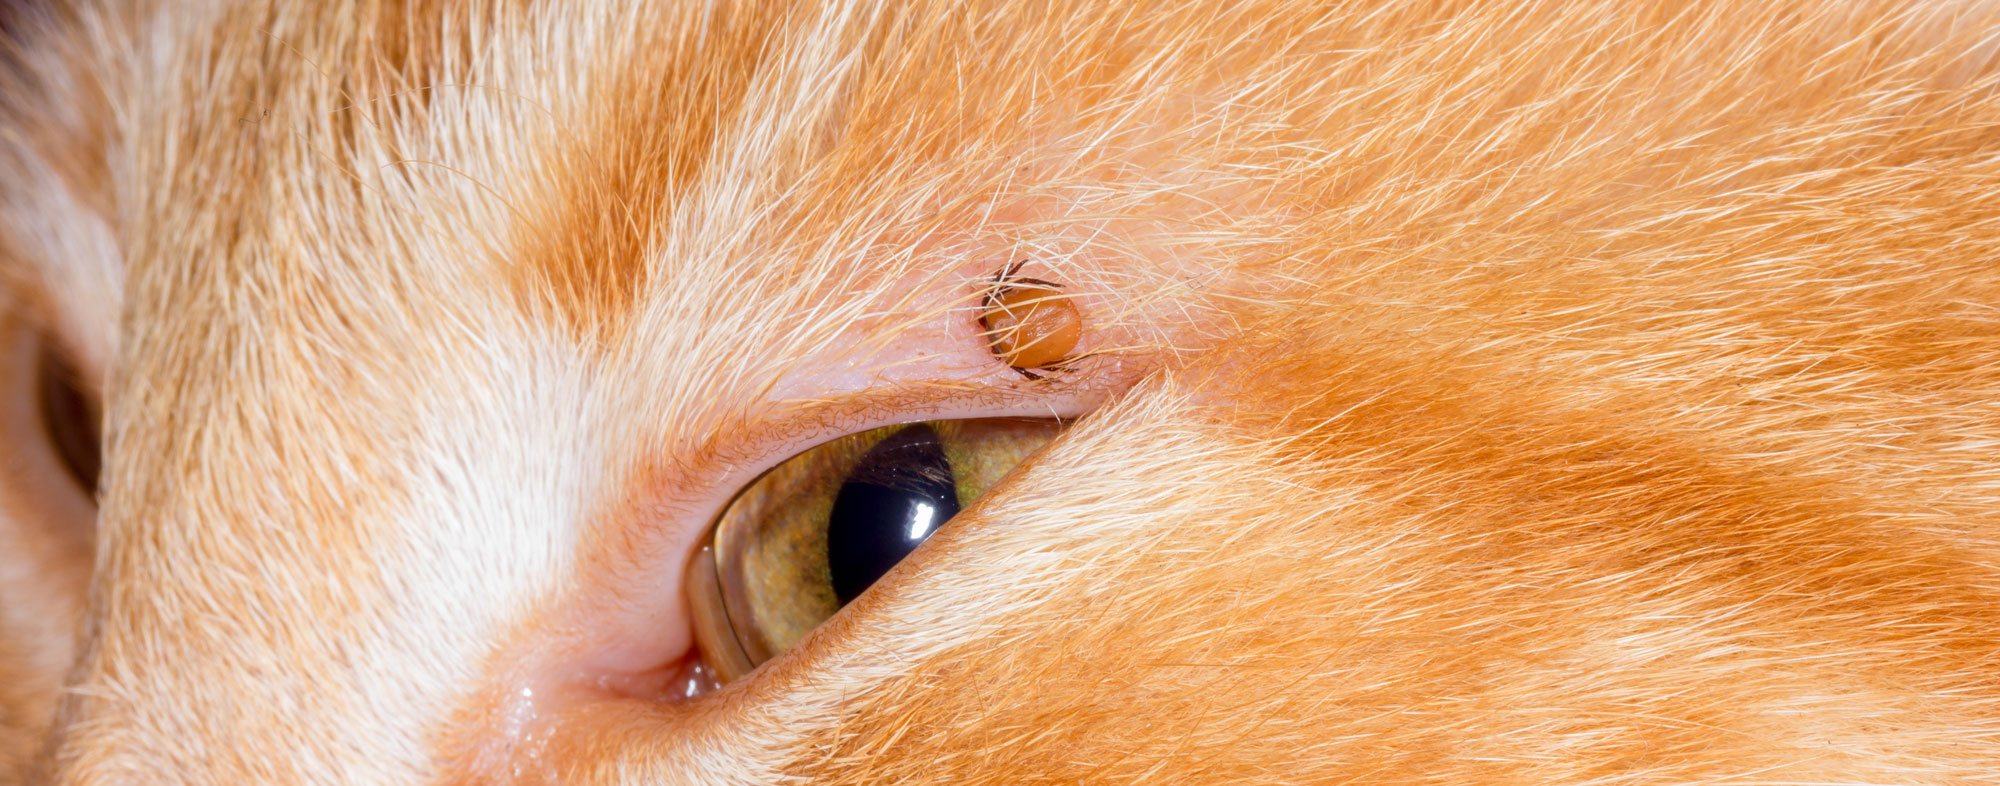 When you find a tick on your cat, it may already be dead